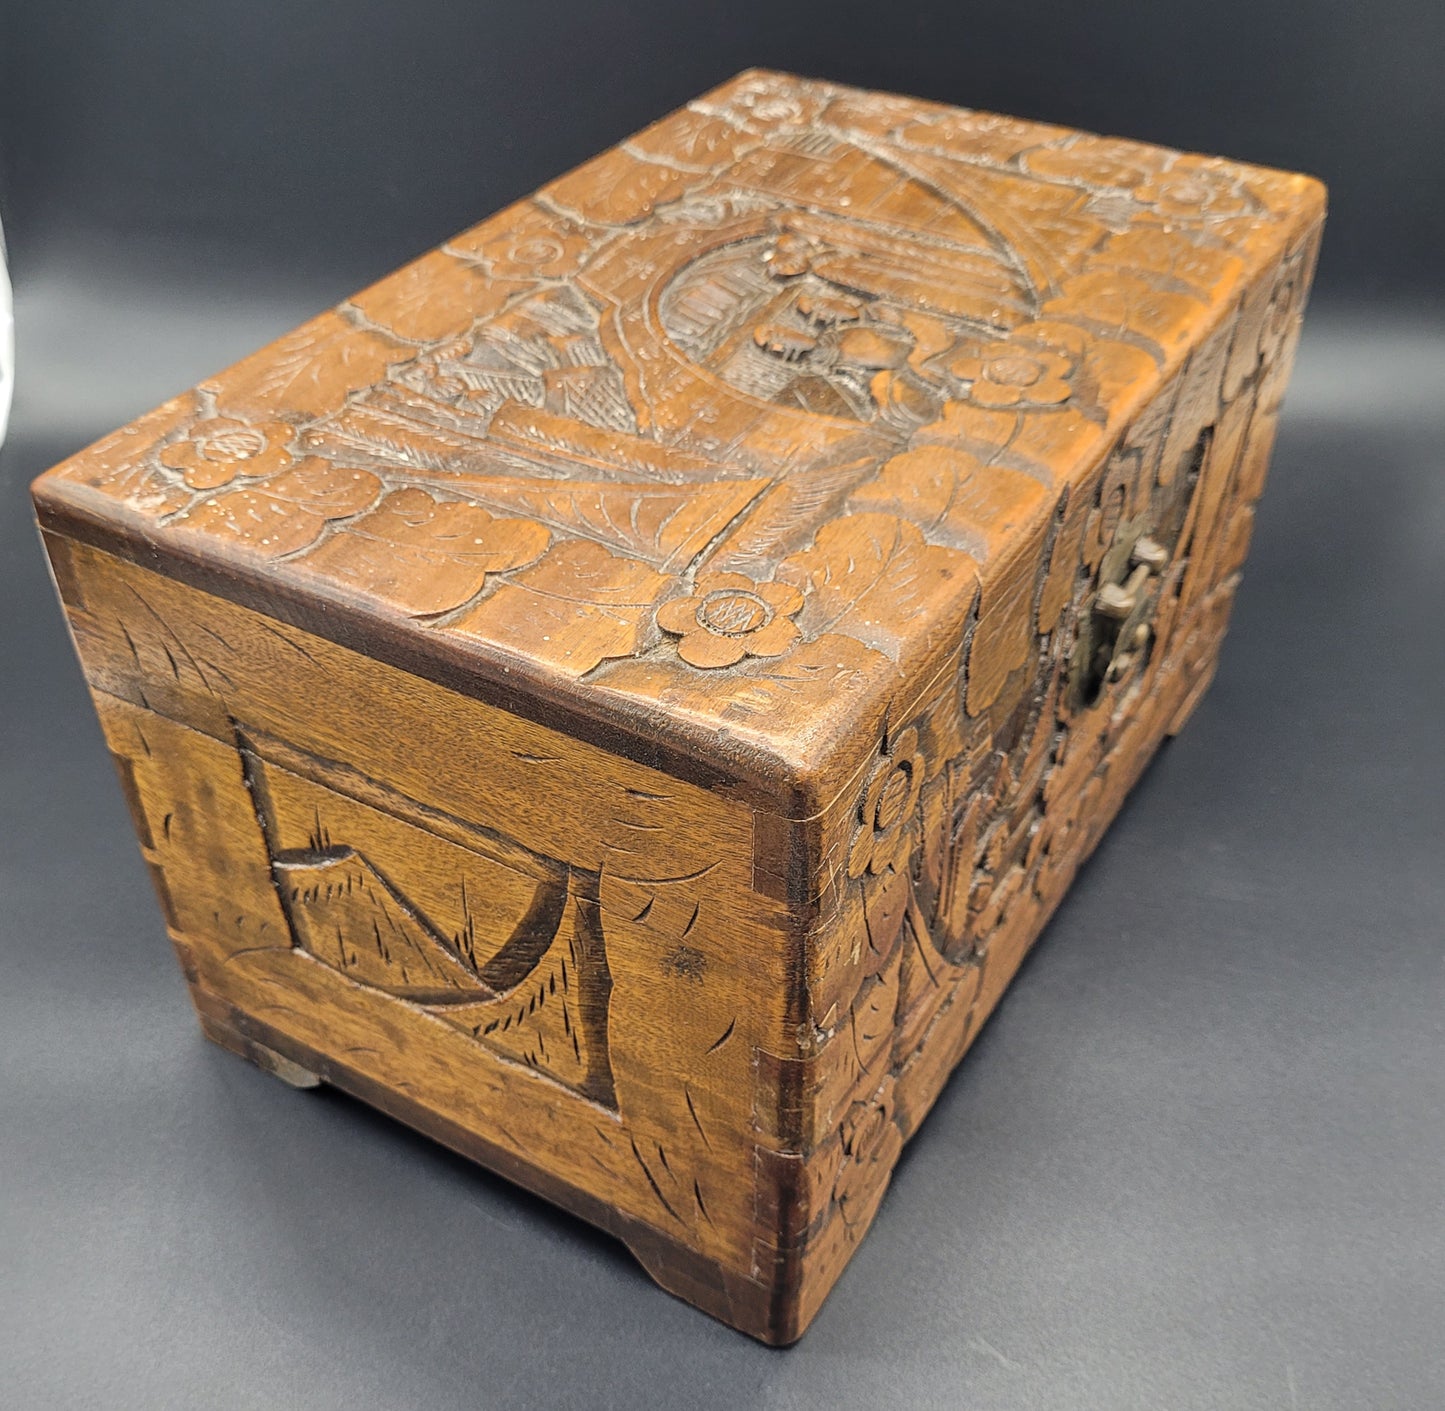 old Chinese Carved Wooden Box at kb antiques 